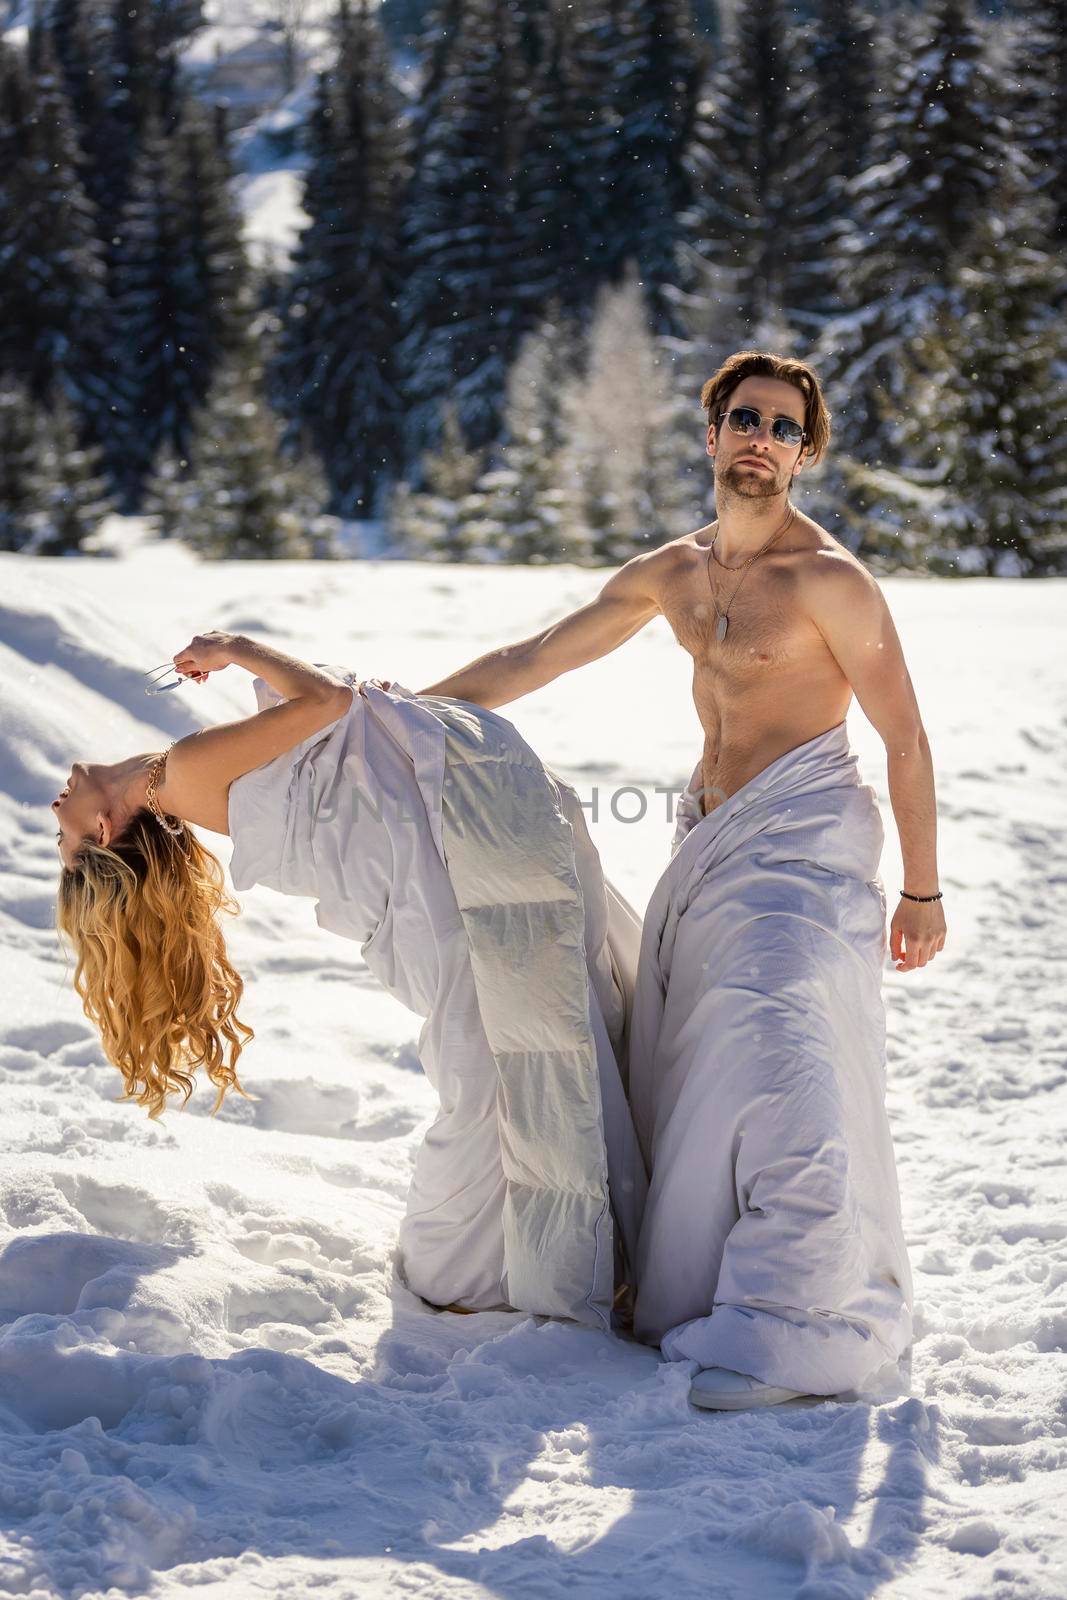 couple in blankets in winter against the background of mountains